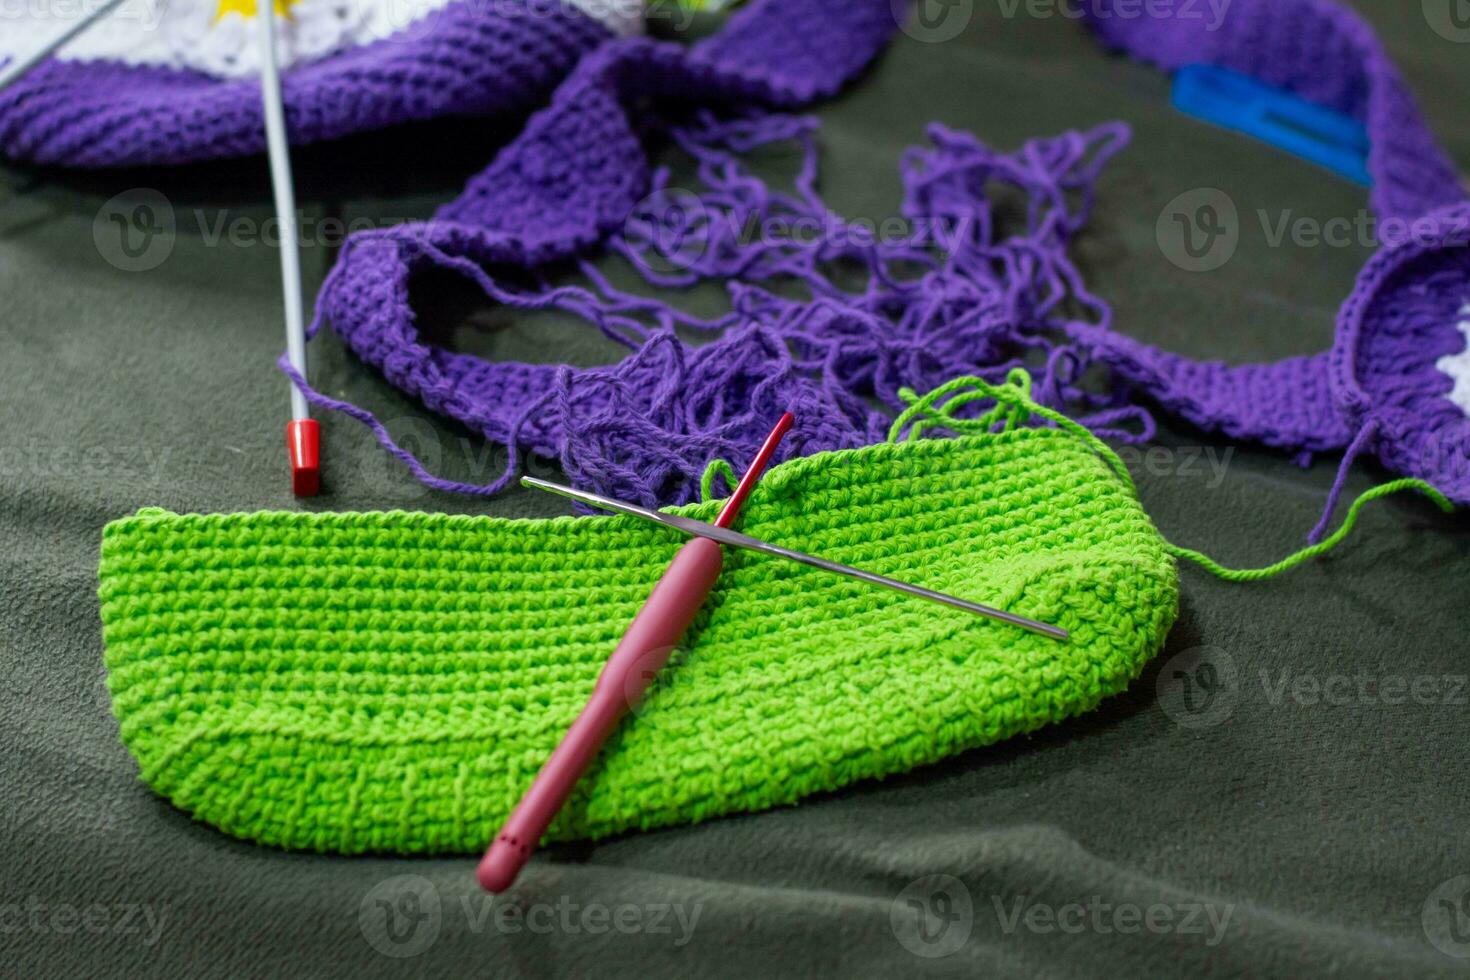 Crochet accessories with koche, using multi-colored threads, handicrafts, on green velvet. photo